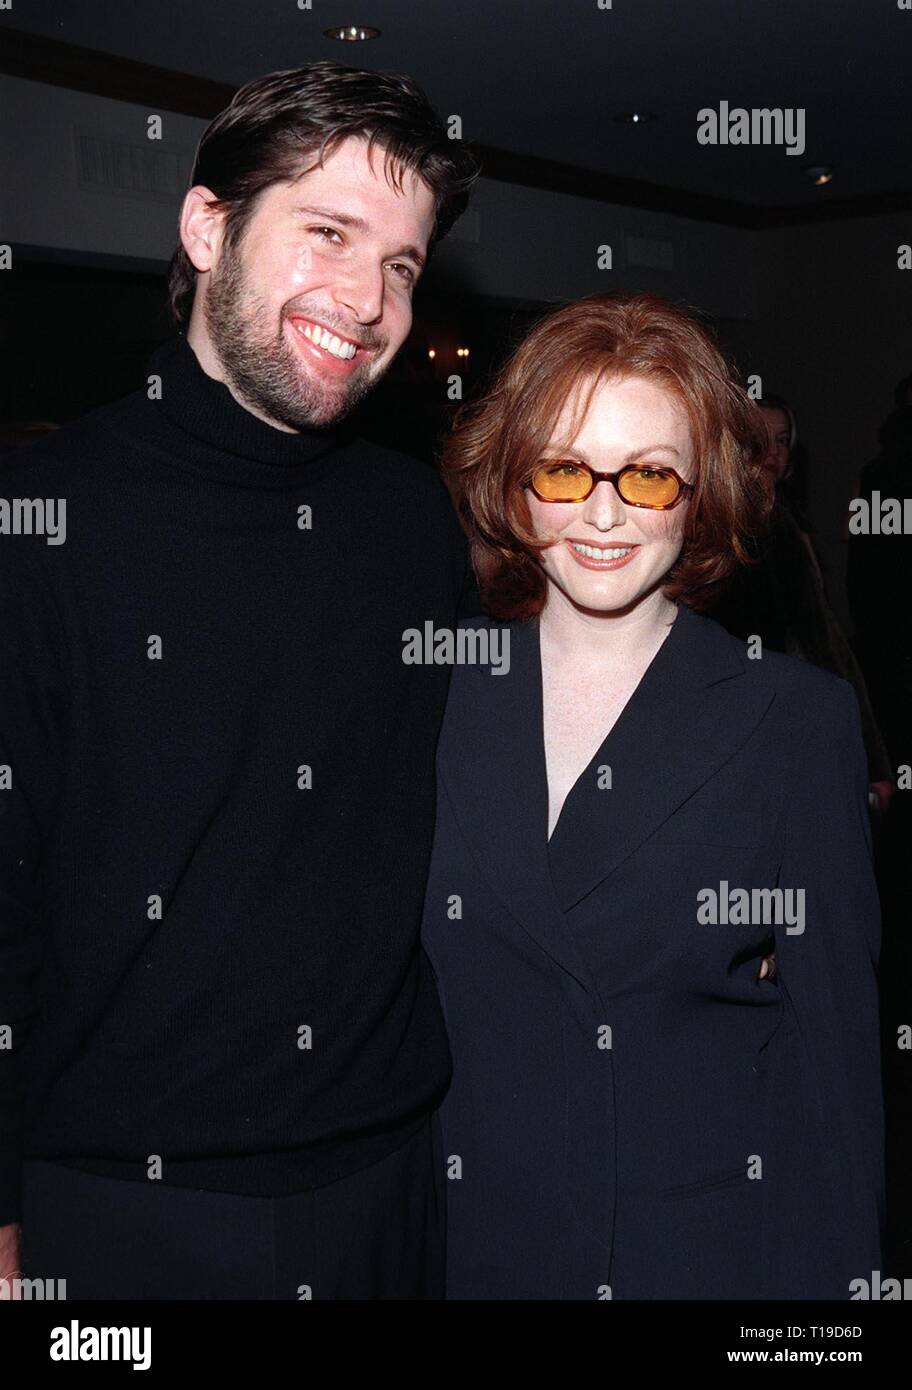 LOS ANGELES, CA - January 13, 1998: Actress JUIANNE MOORE & husband at the L.A. Film Critics Assoc. Awards where she won the Best Supporting Actress award for 'Boogie Nights.' Stock Photo